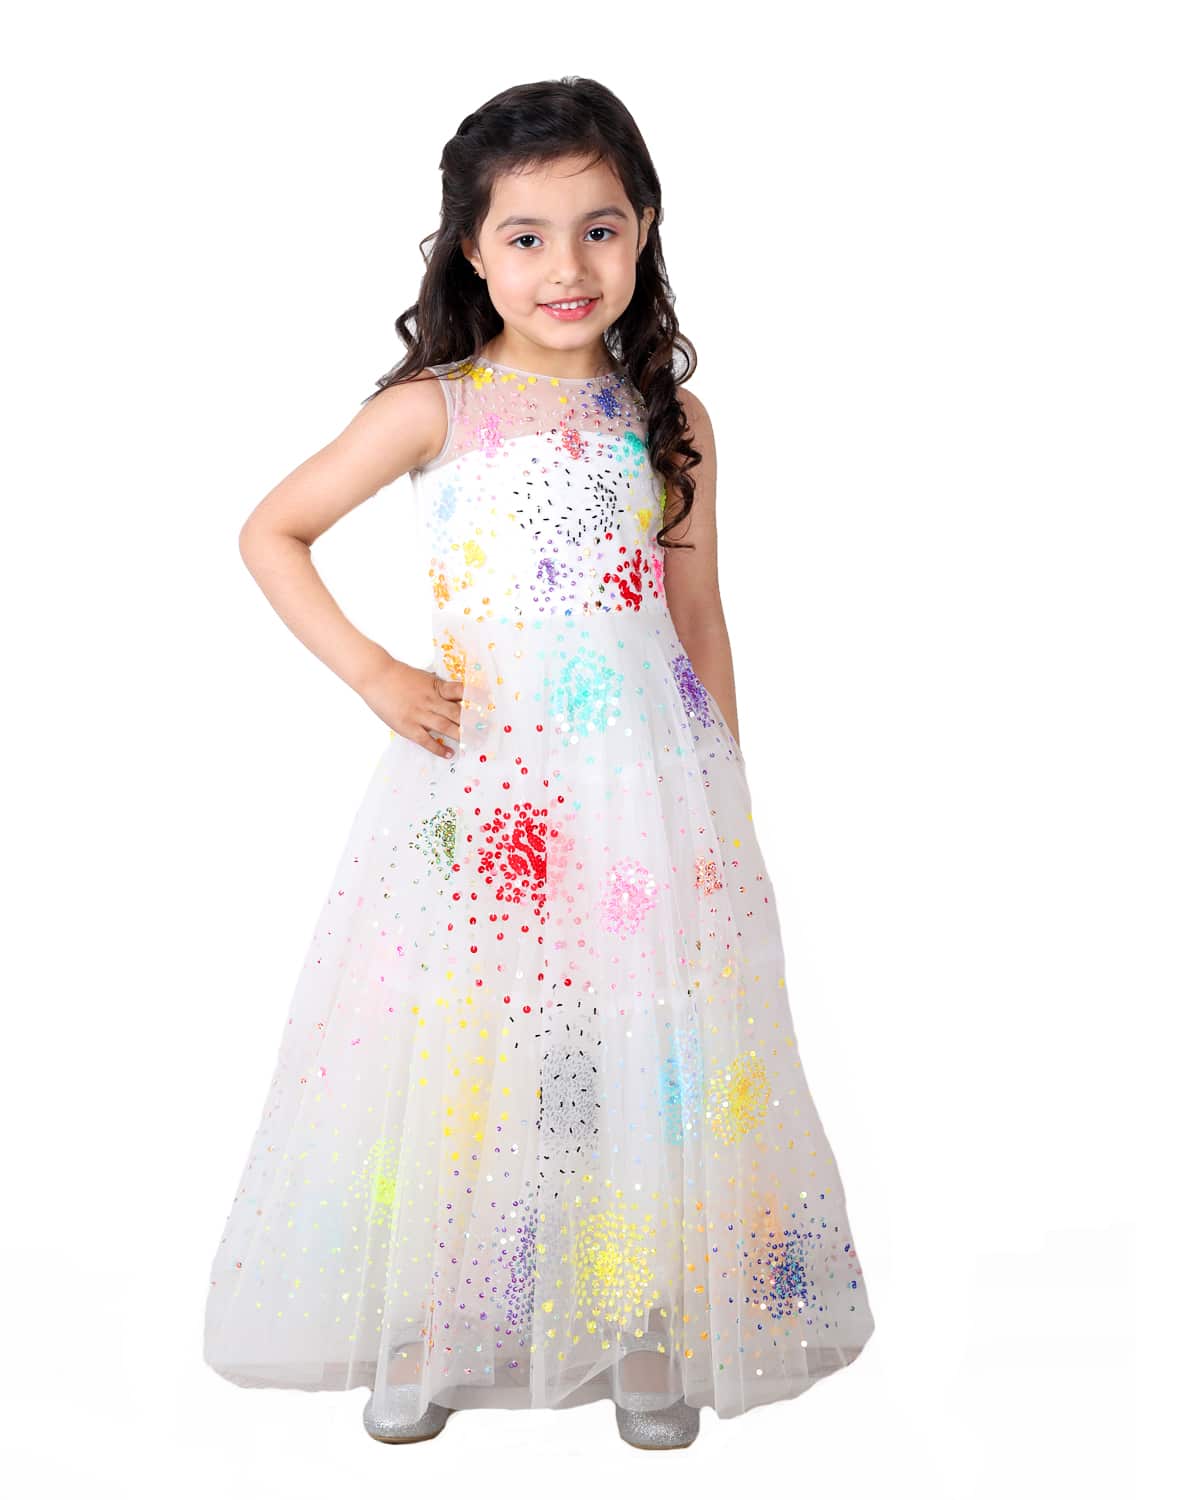 Confetti - Over A Thousand Sequins Embellished,Splashes Of Color Like Embroidered Full Length Net Gown With Several Layers Of Tulle.